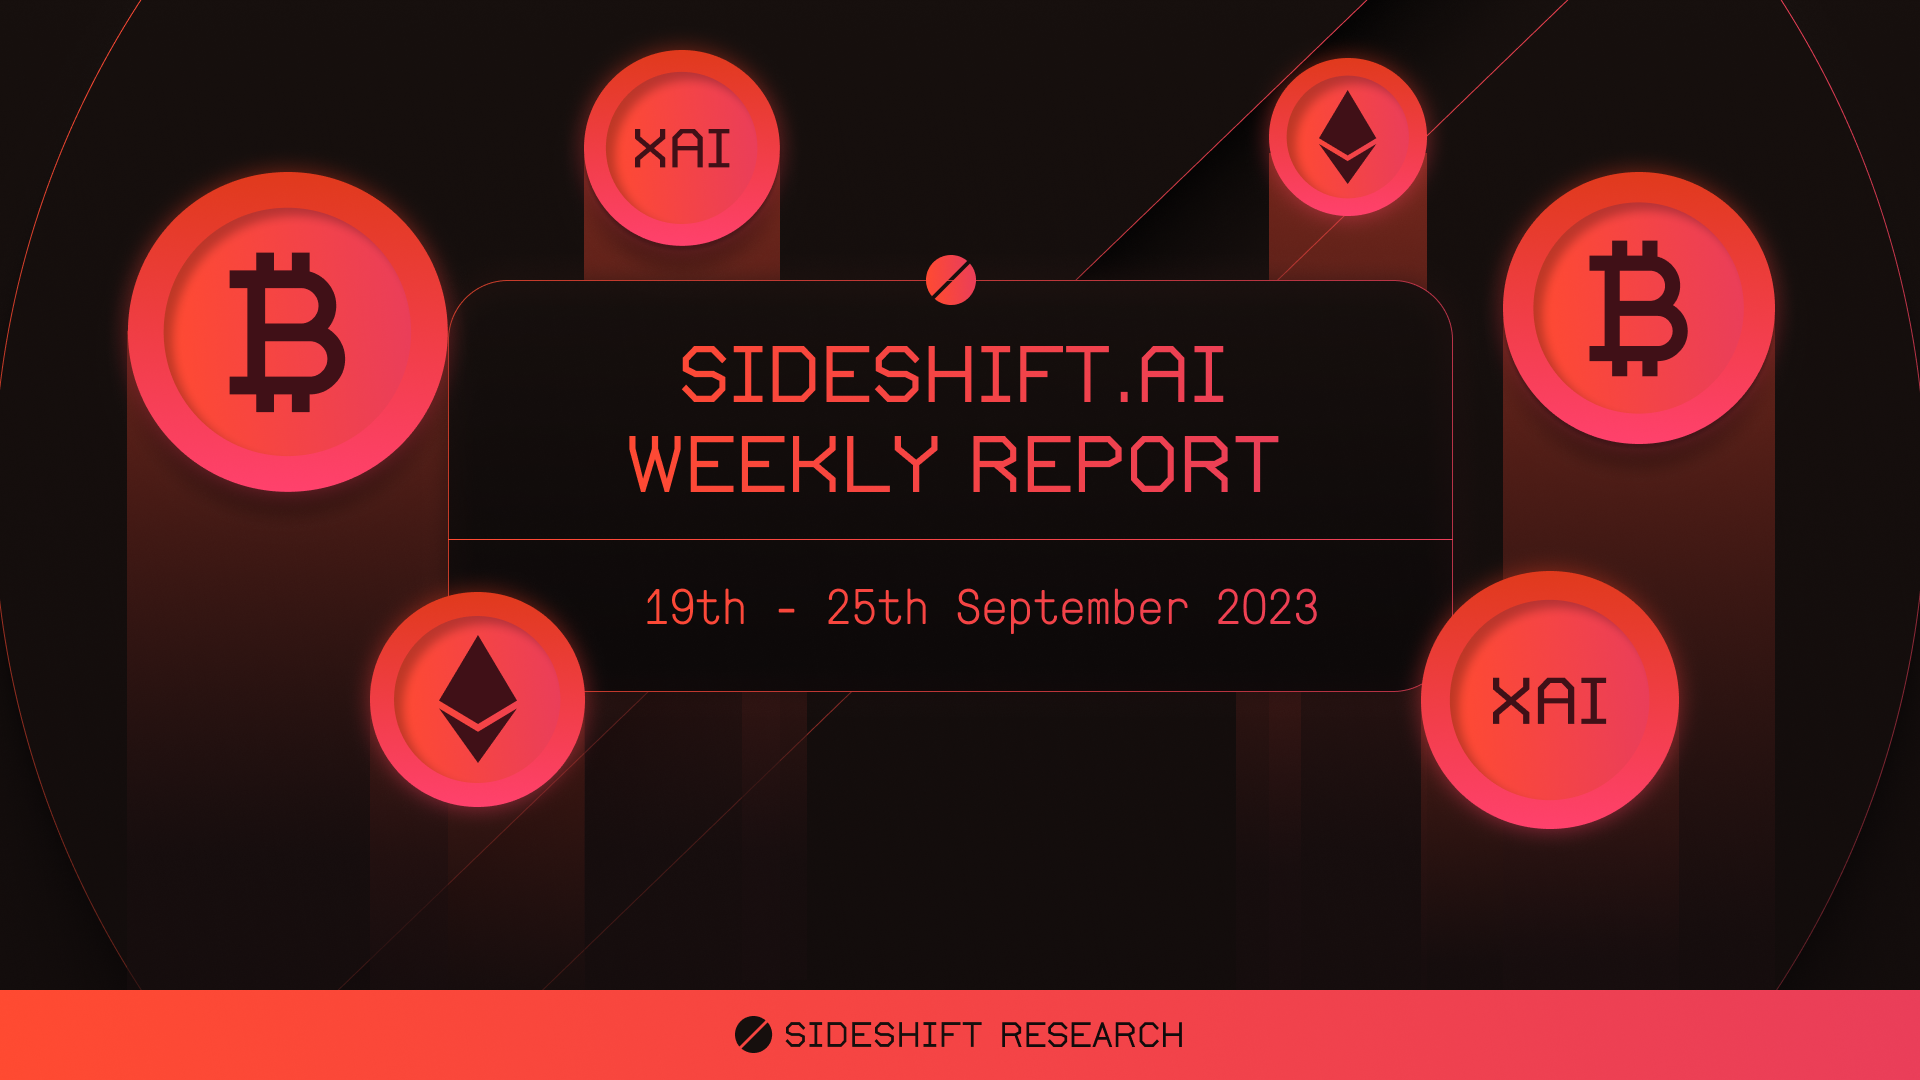 SideShift.ai Weekly Report | 19th - 25th September 2023